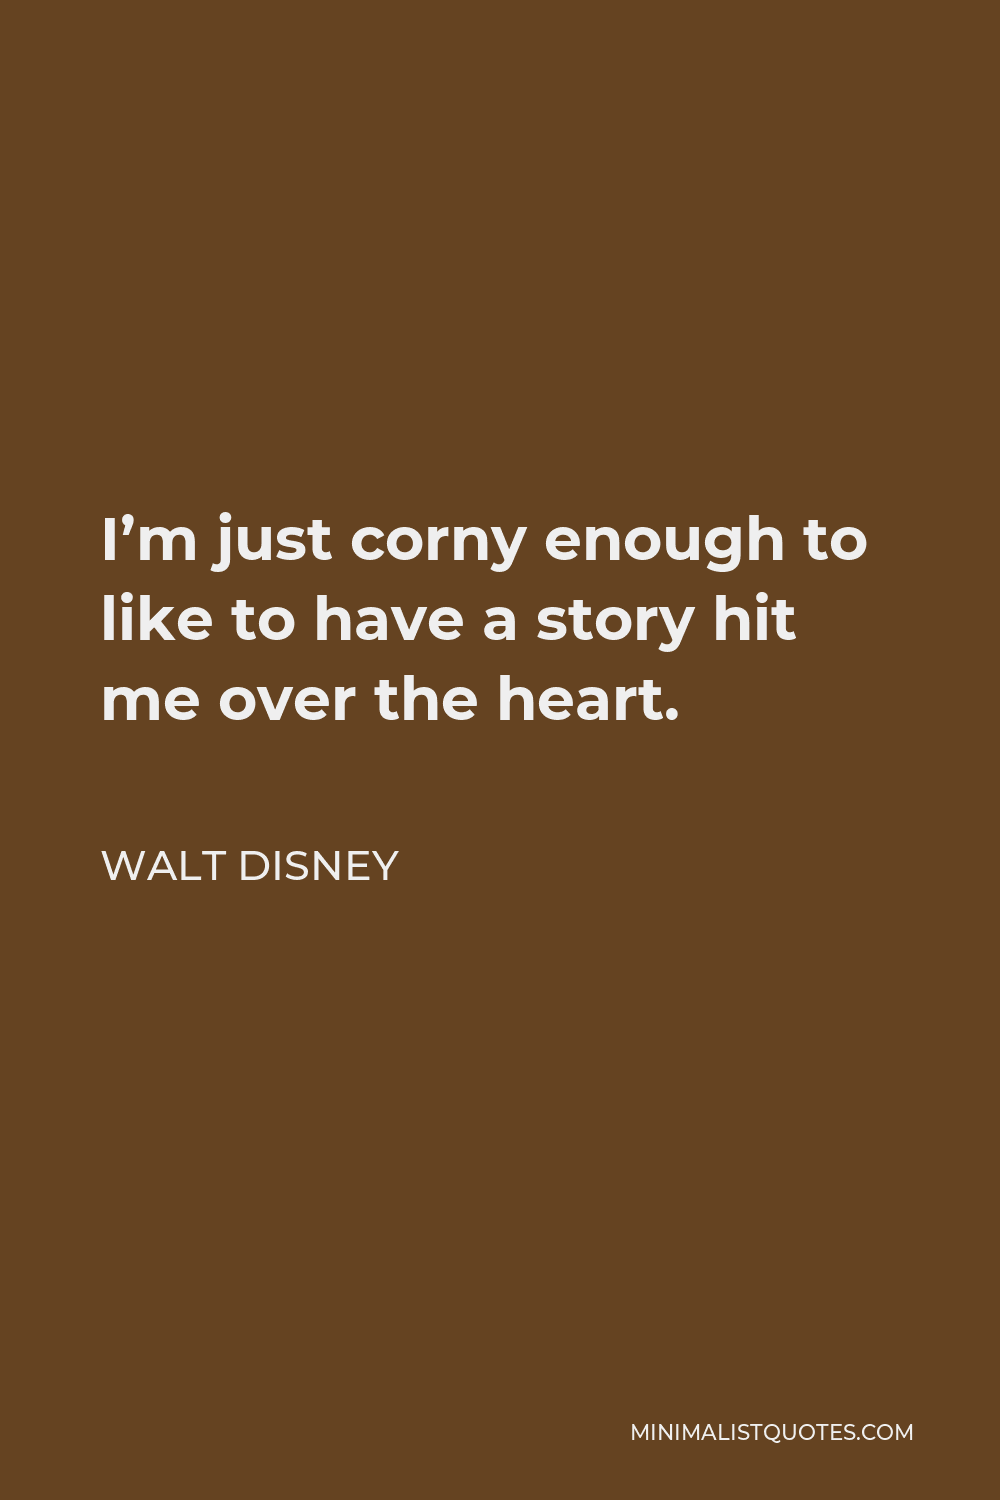 Walt Disney Quote - I’m just corny enough to like to have a story hit me over the heart.